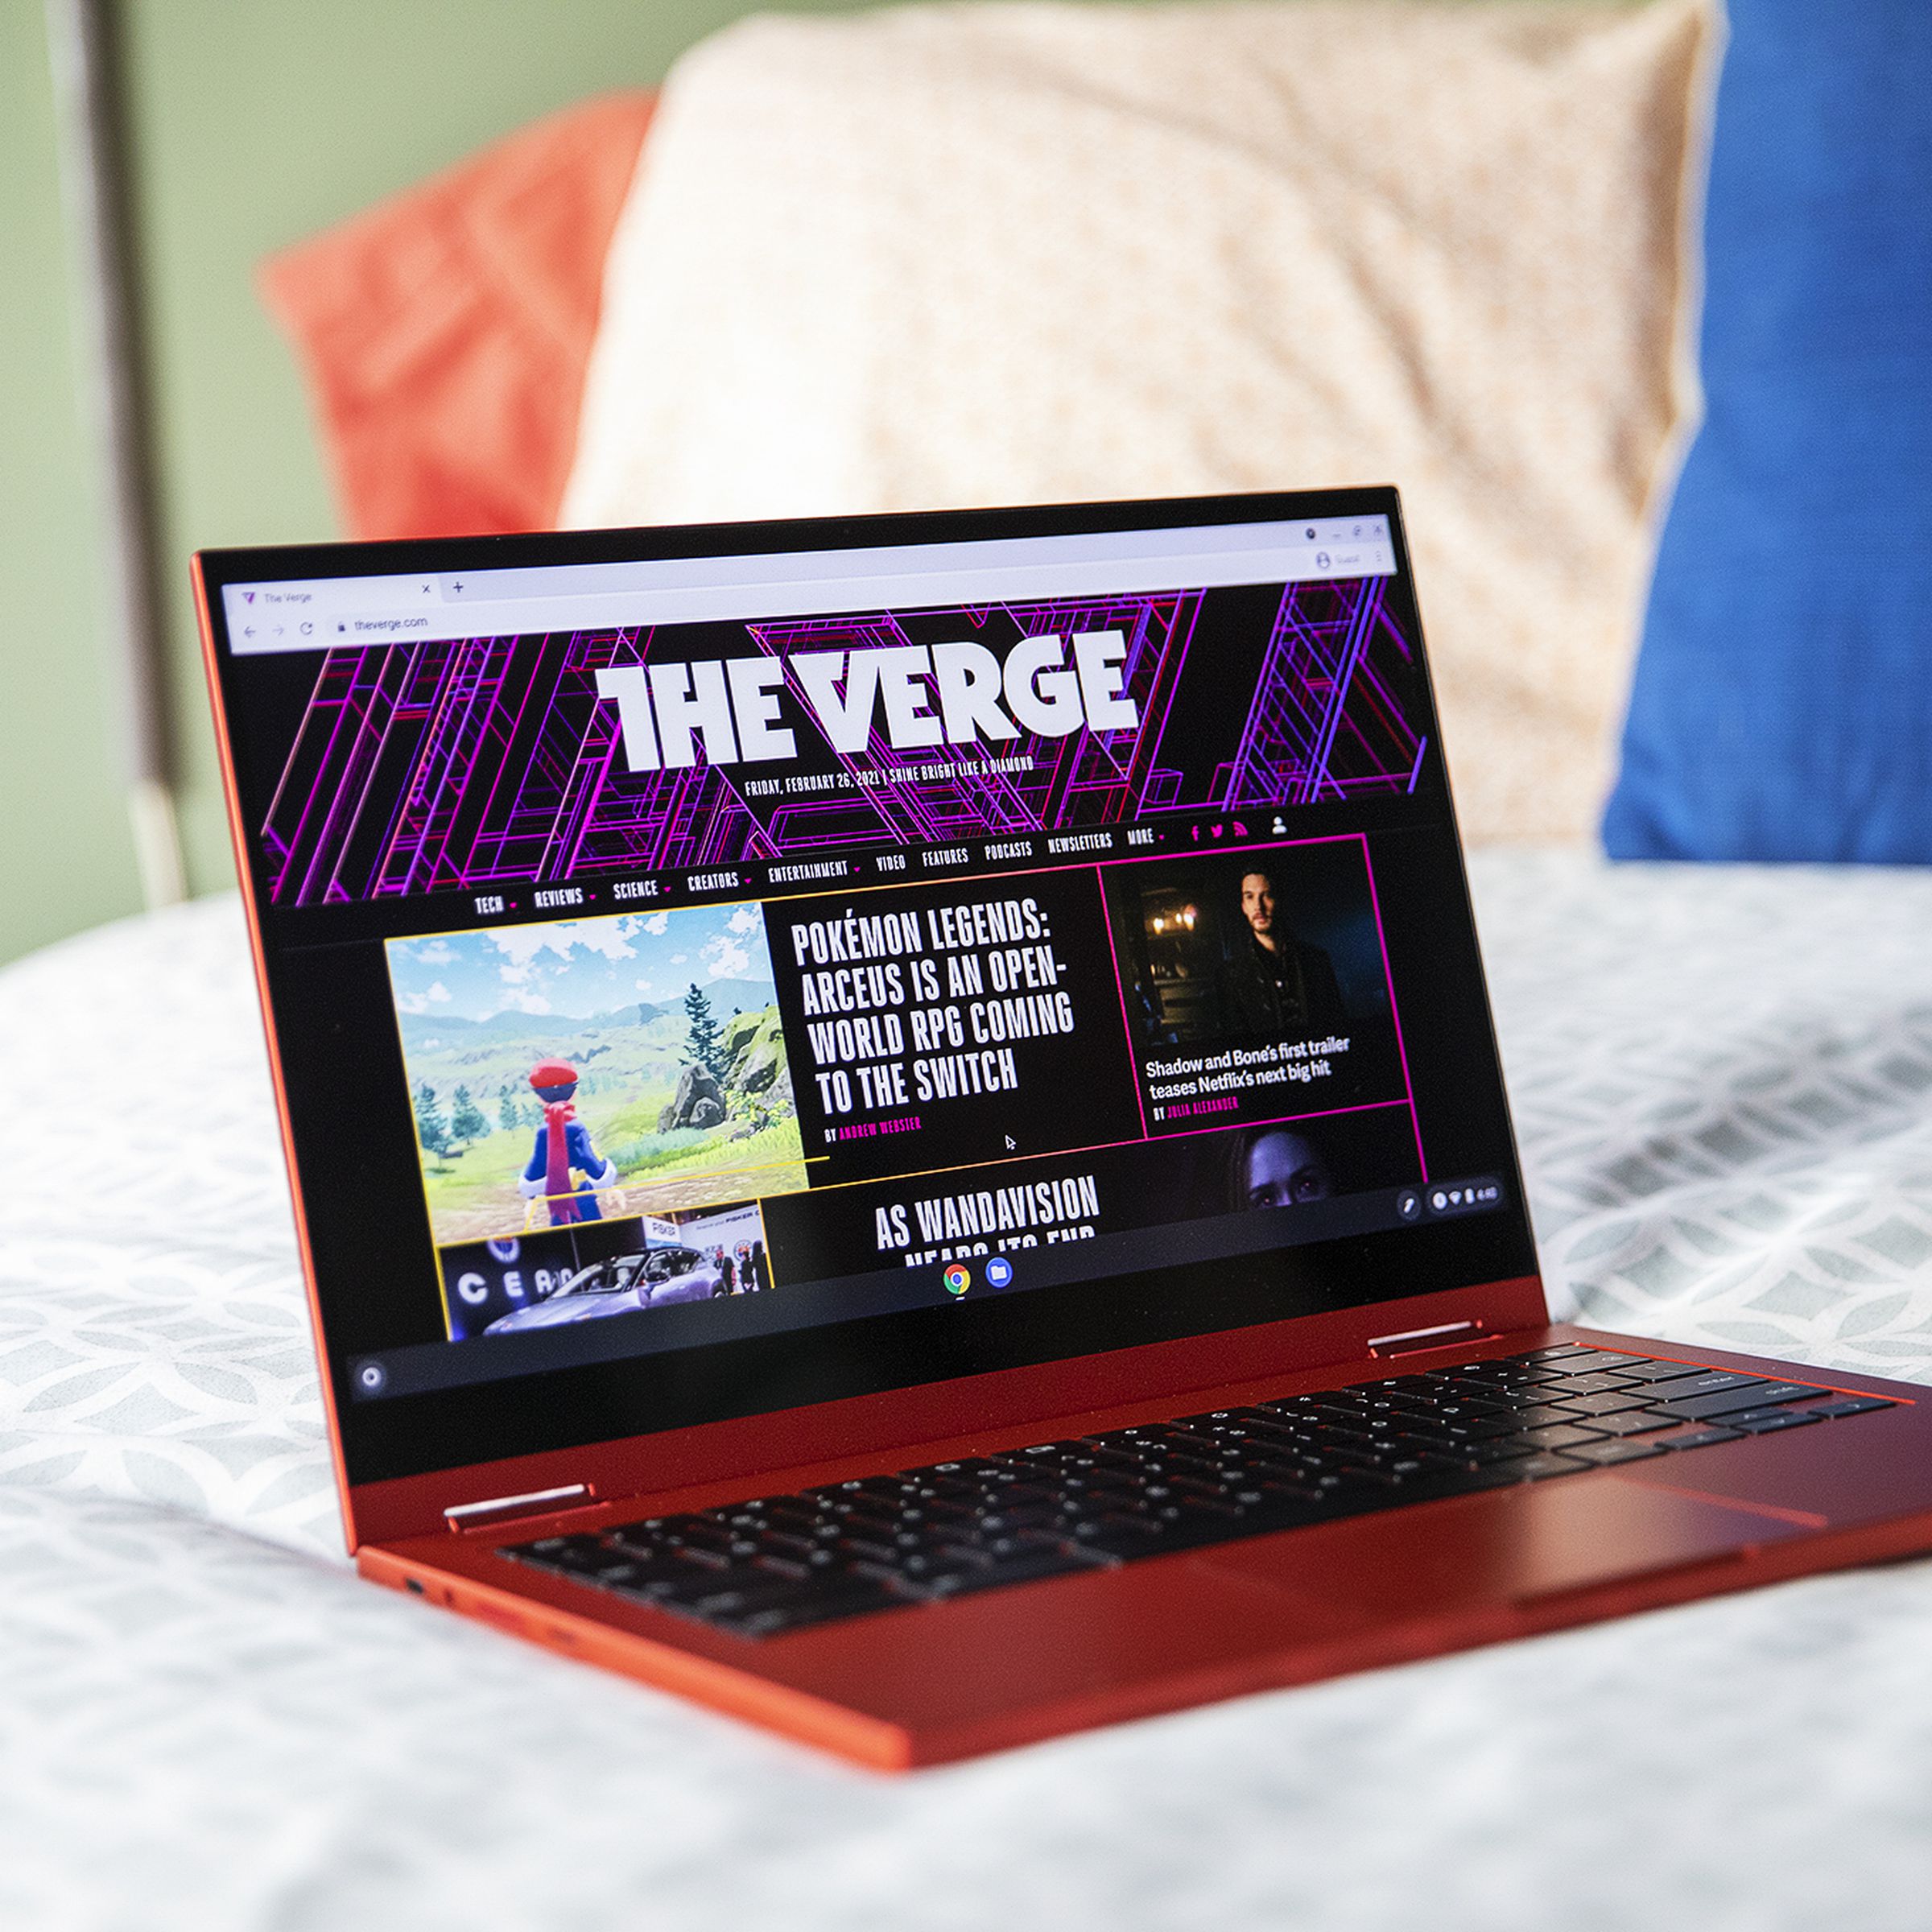 The Samsung Galaxy Chromebook open, angled slightly to the right on the corner of a bed. The screen displays The Verge homepage.